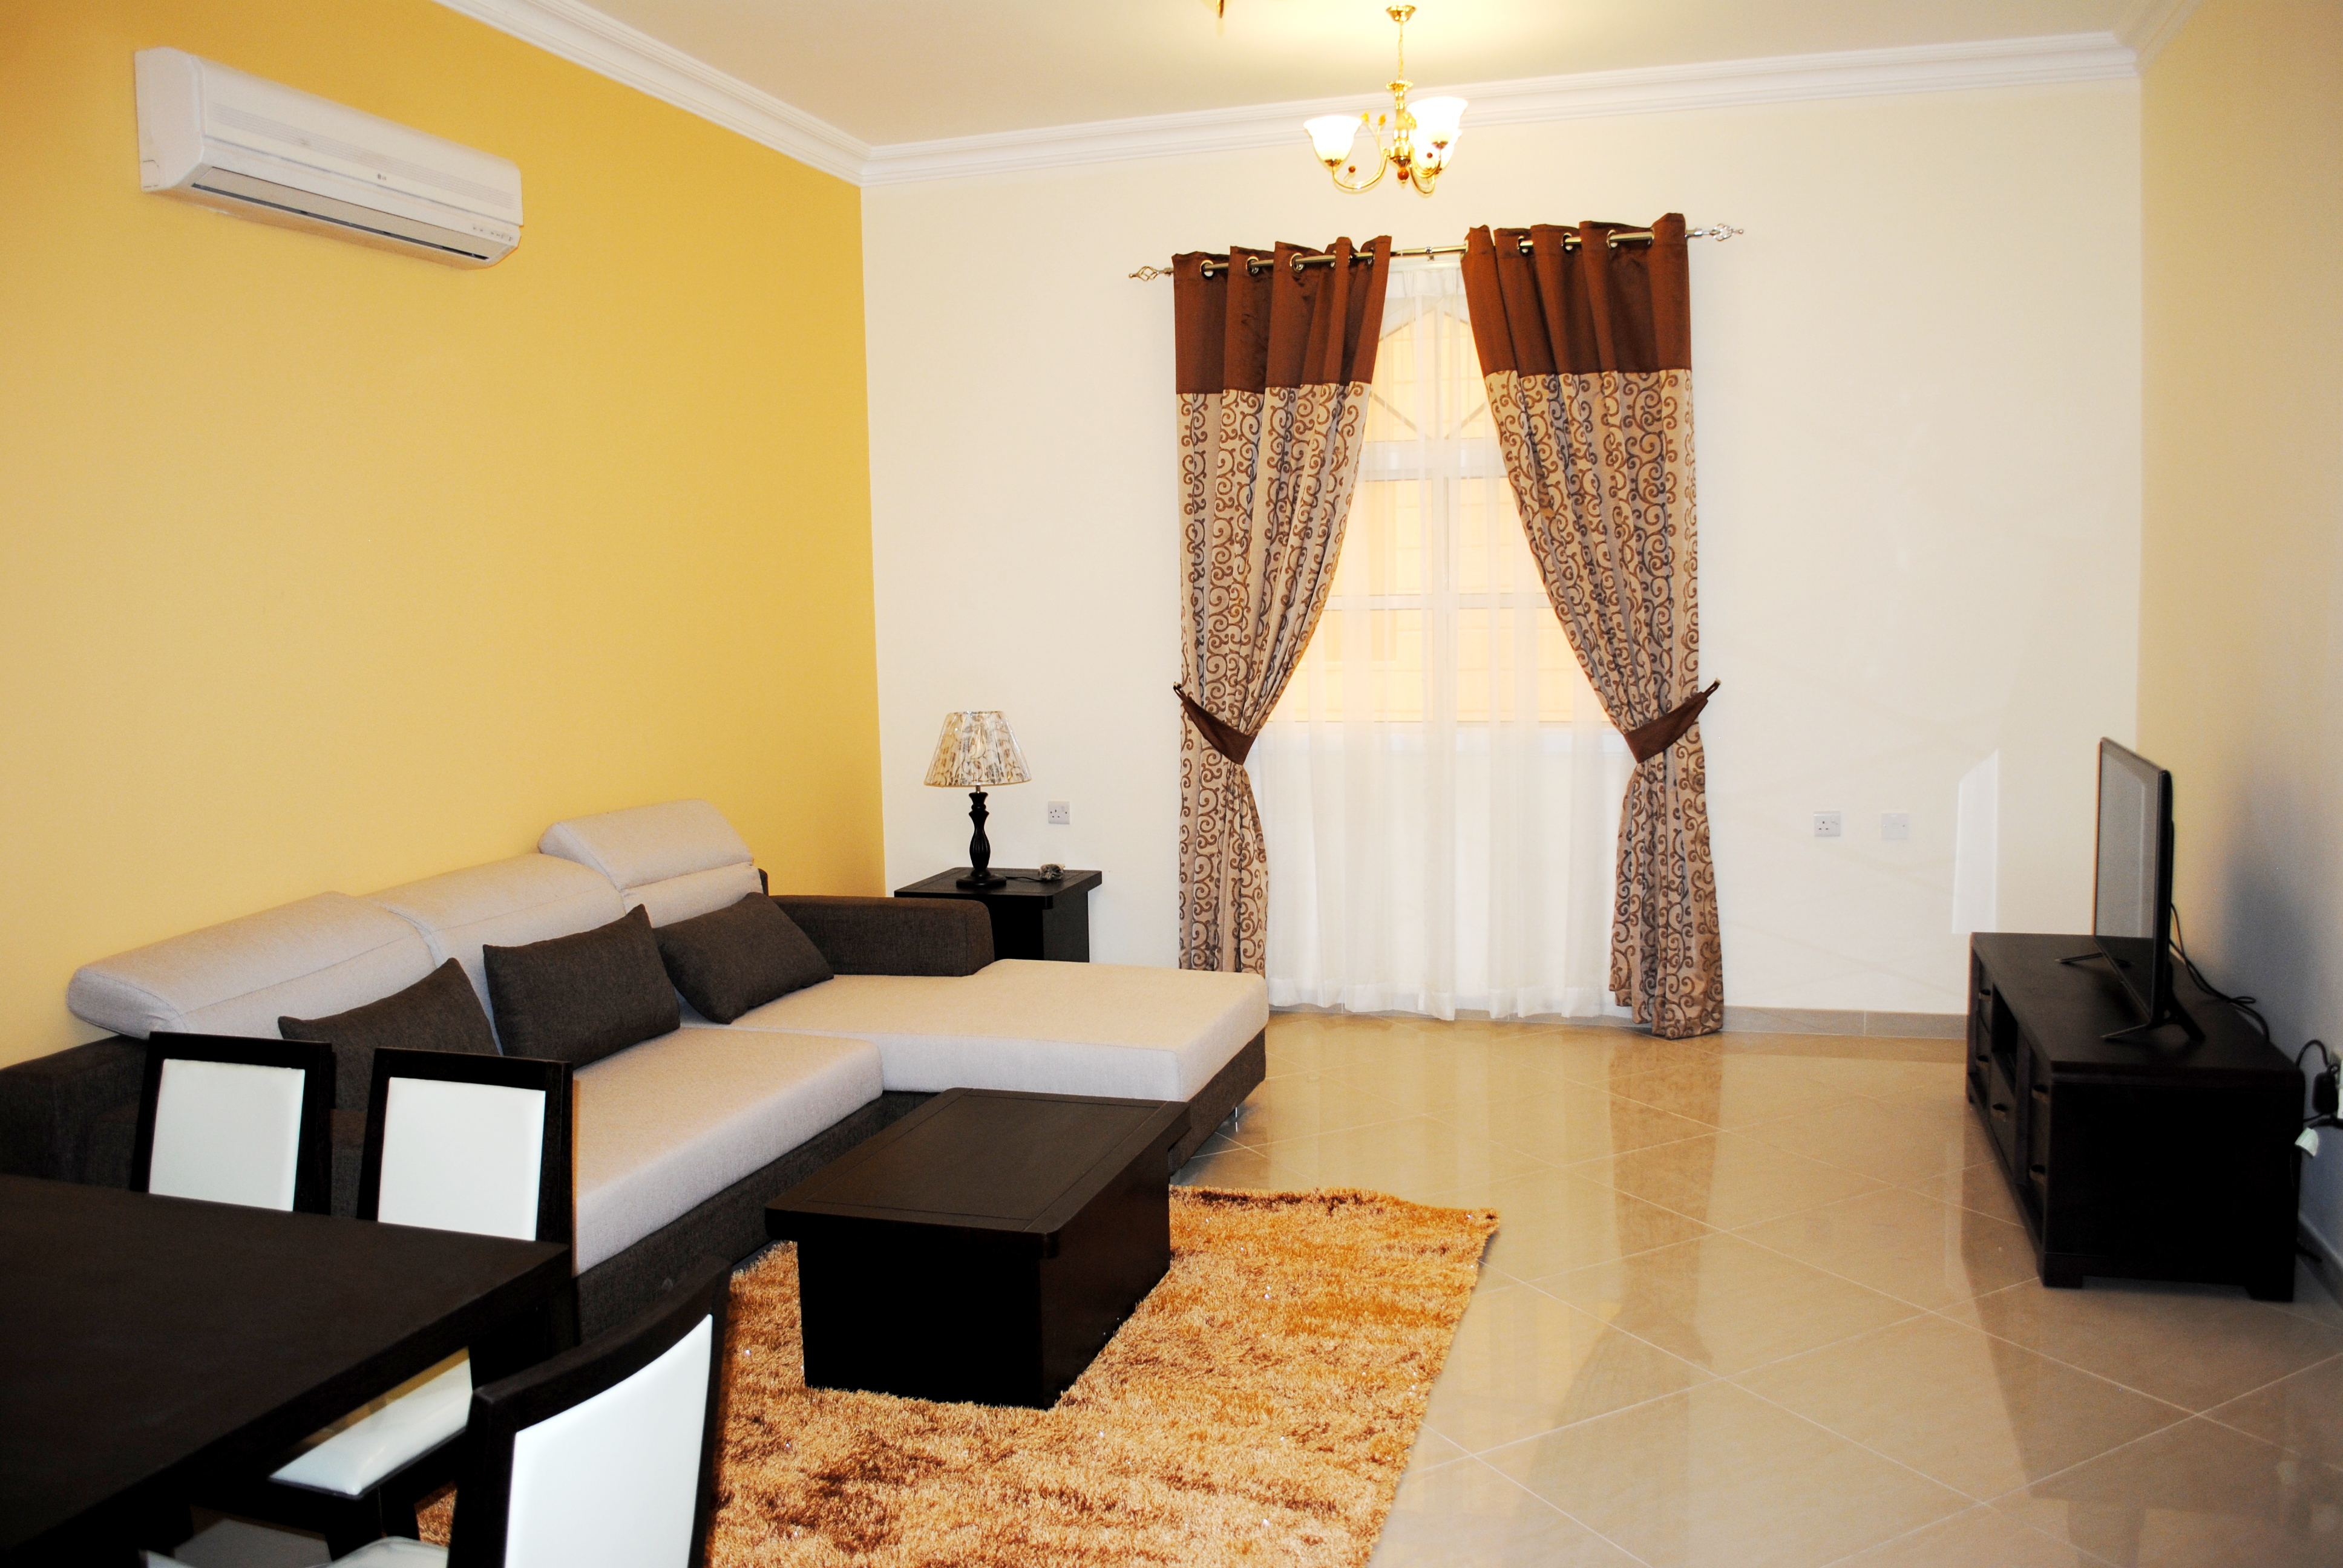 3 bedrooms fully furnished apartments with Maintenance in P-141